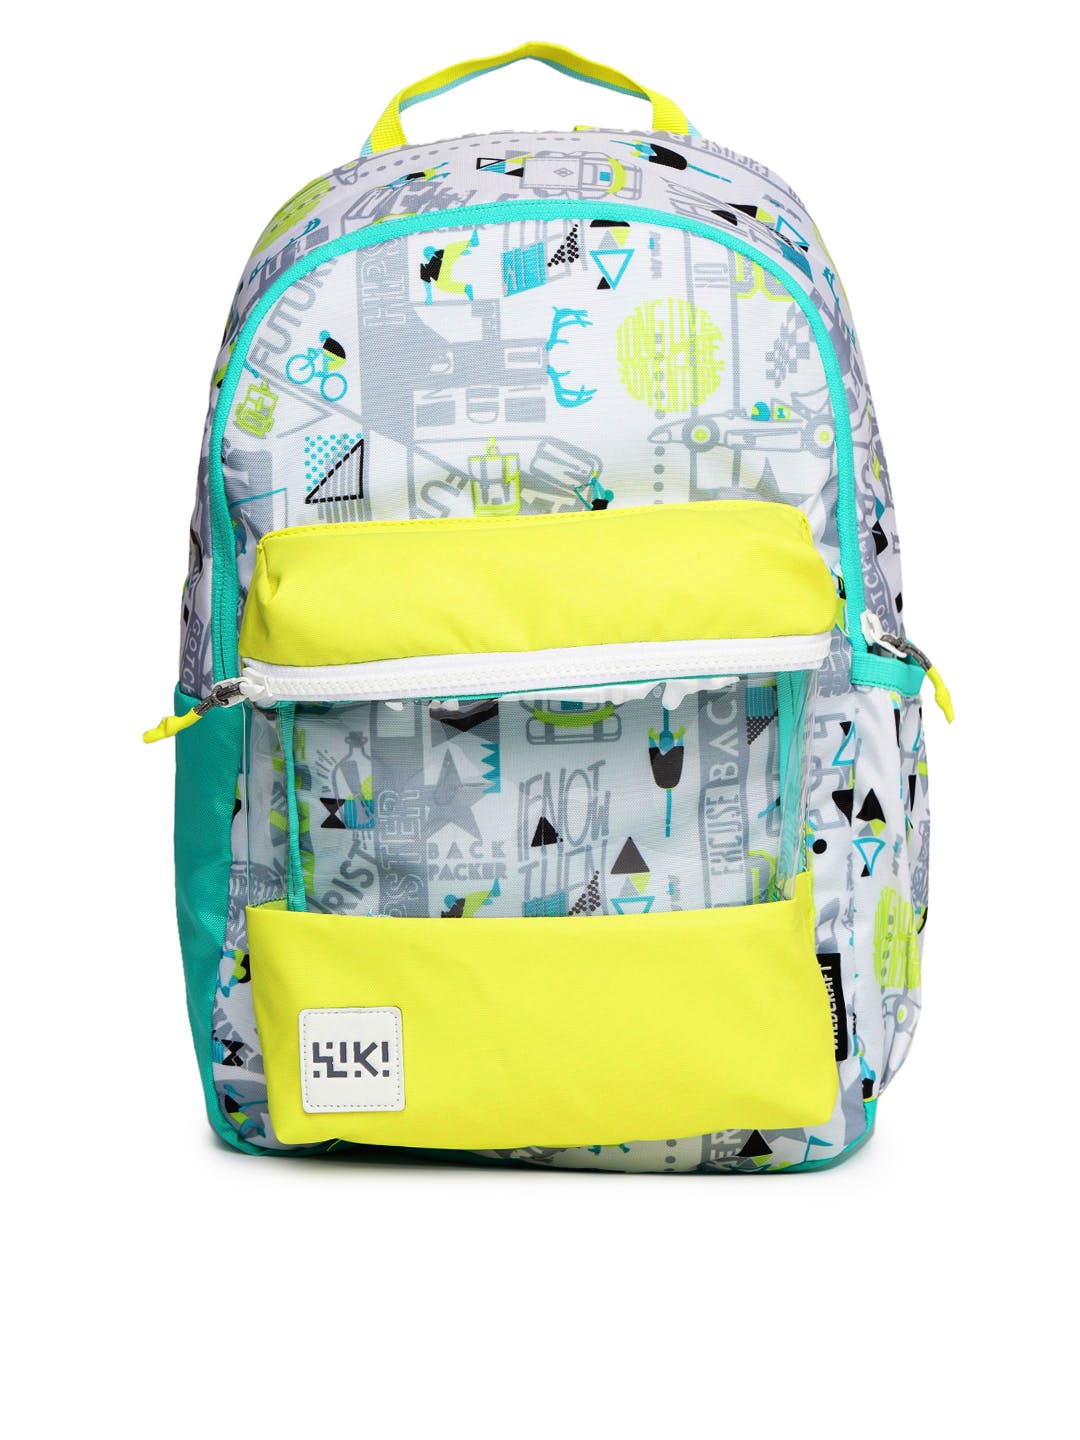 Product,Bag,Backpack,Green,Yellow,Luggage and bags,Baby Products